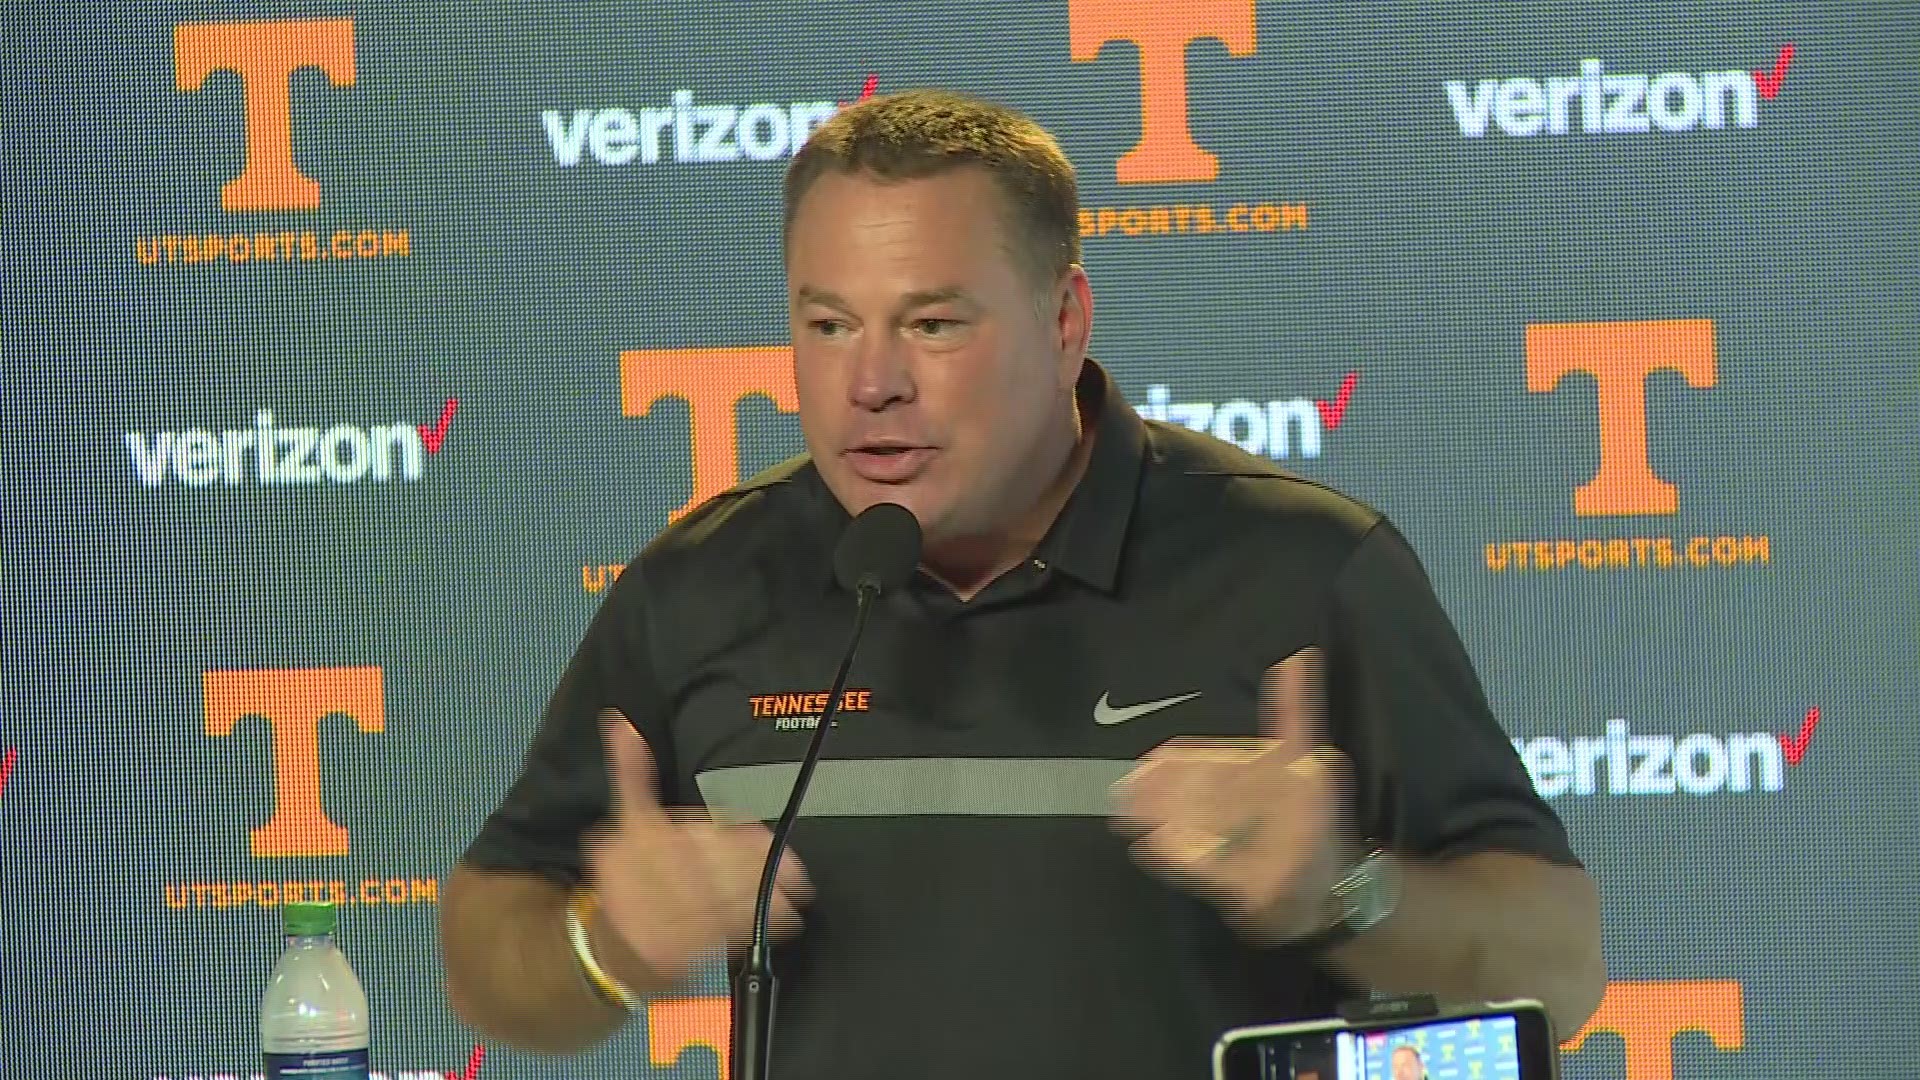 At the very end of his Monday press conference, Butch Jones was asked a question about a rumor surrounding Vols defensive lineman Shy Tuttle's undisclosed injury. Butch went on to give his thoughts about media coverage and negativity.